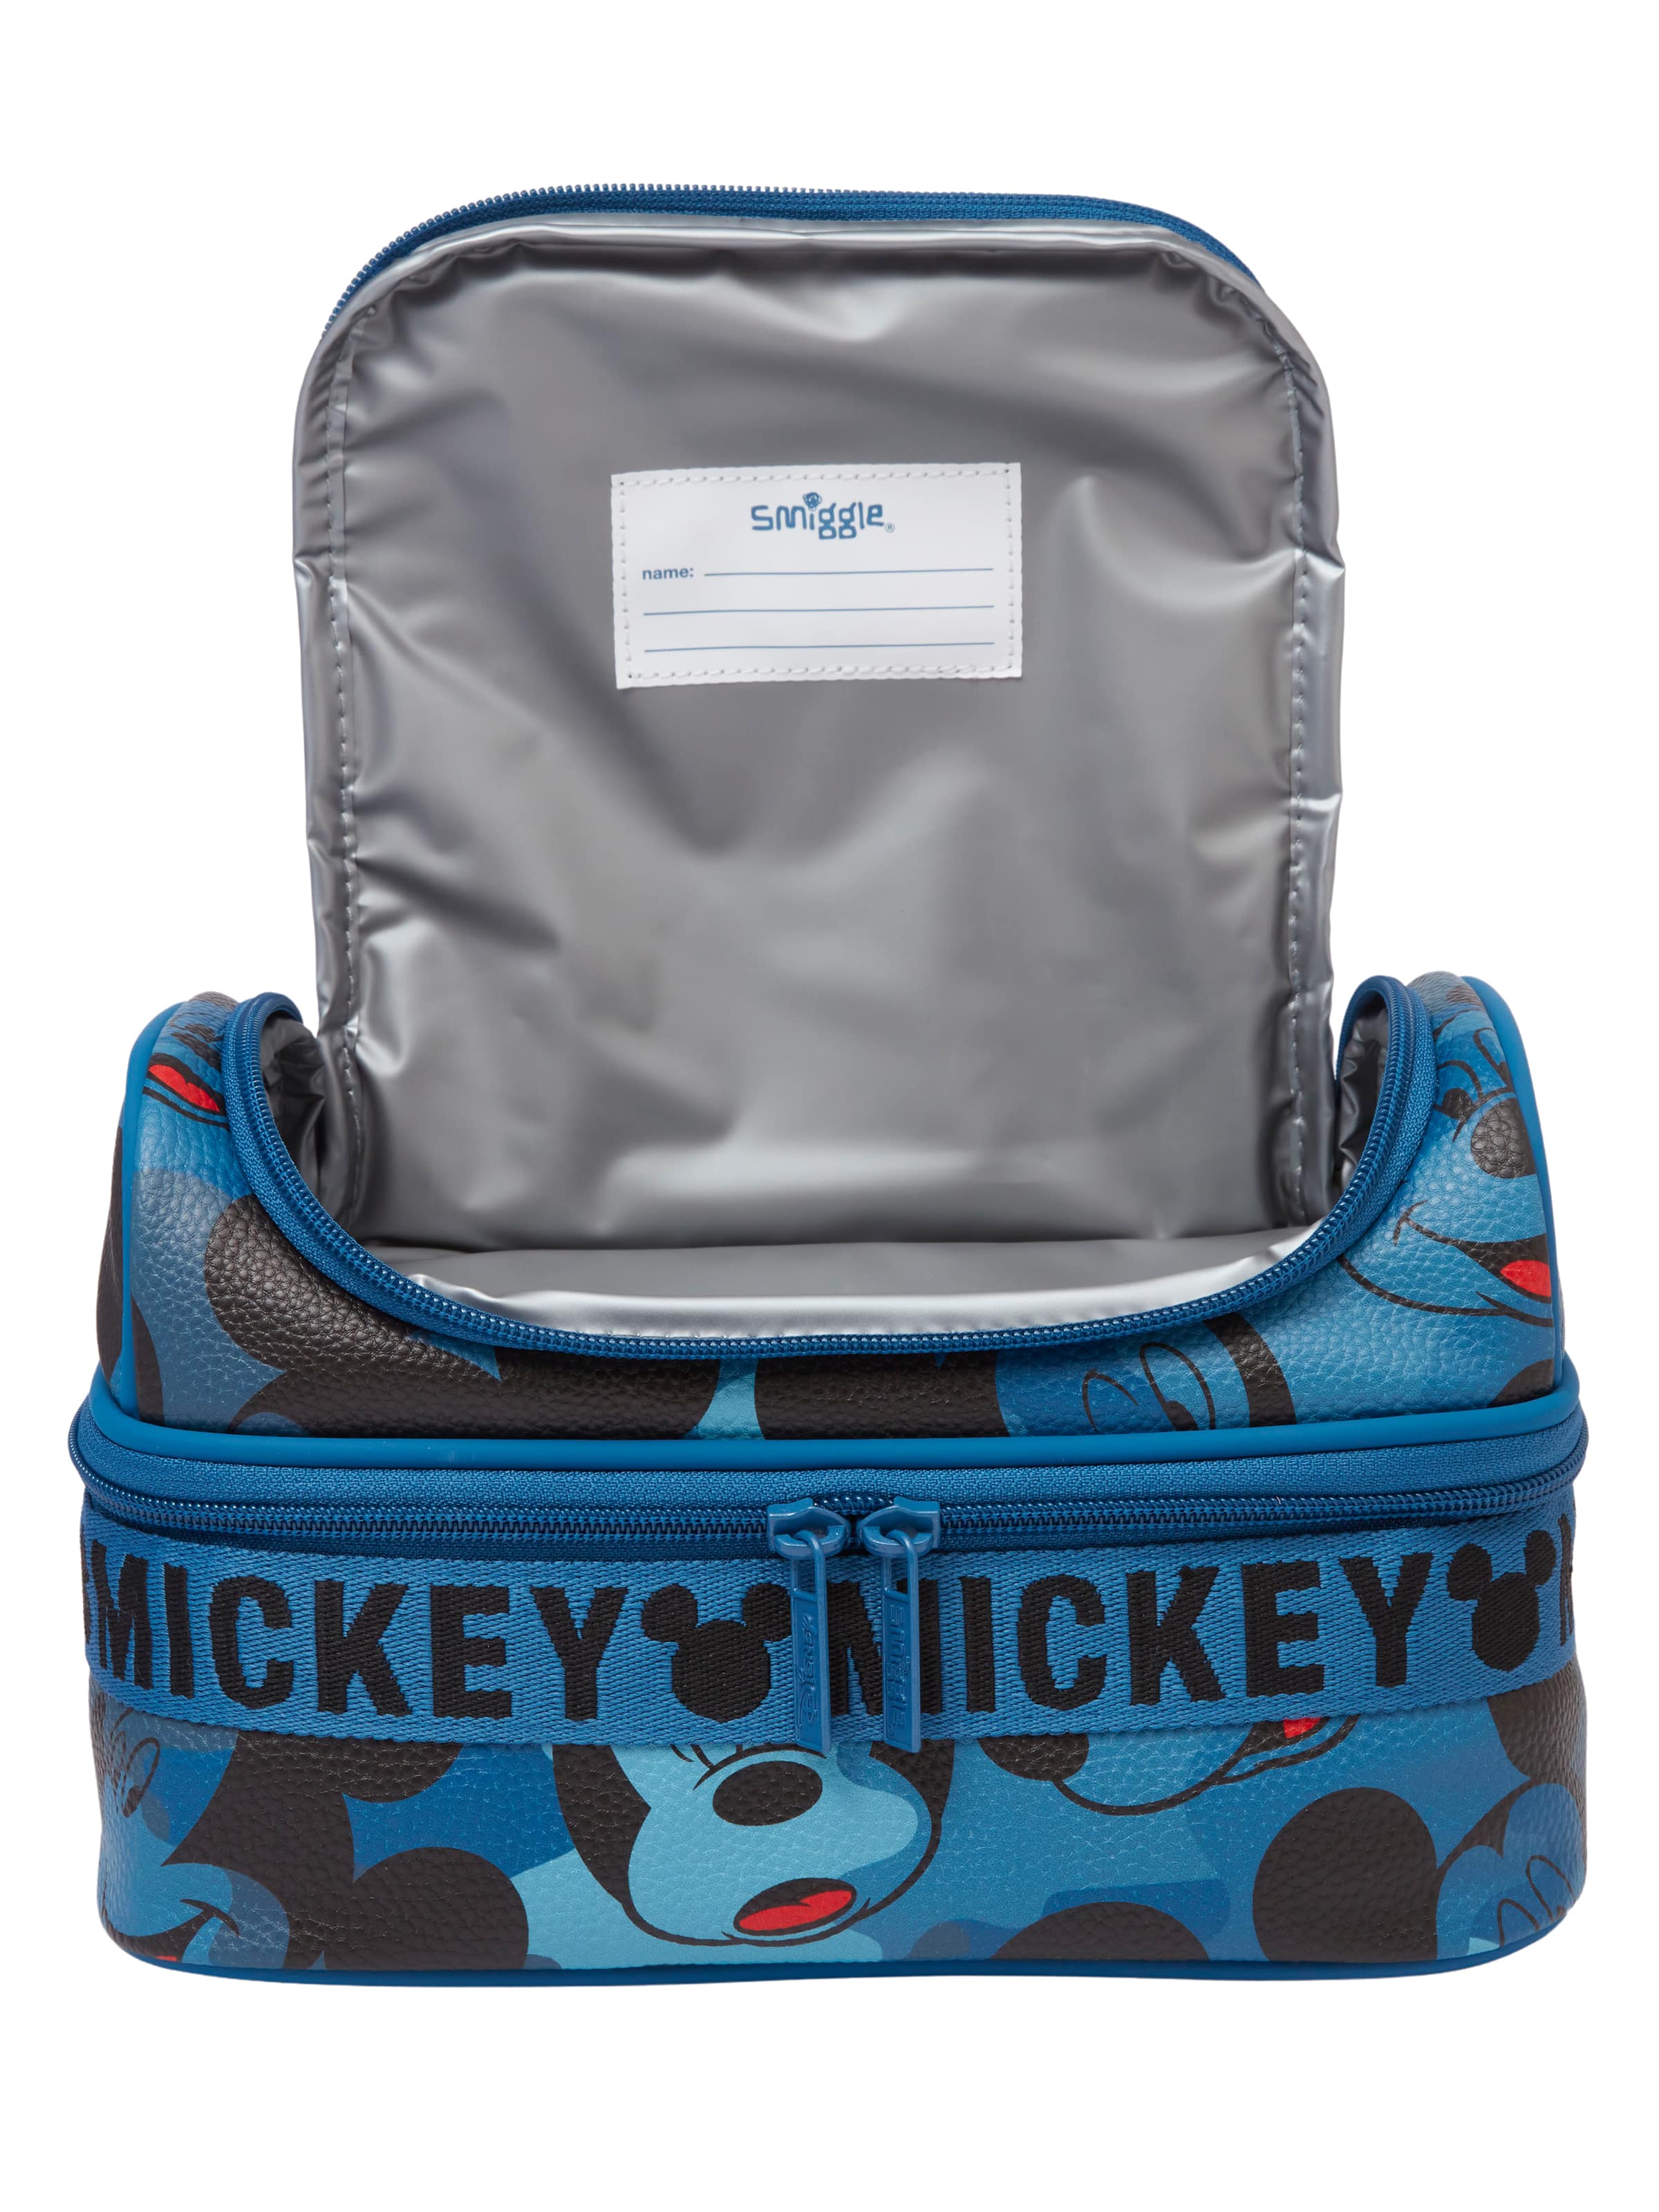 Mackenzie Gray Disney Mickey Mouse Lunch Boxes | Pottery Barn Kids